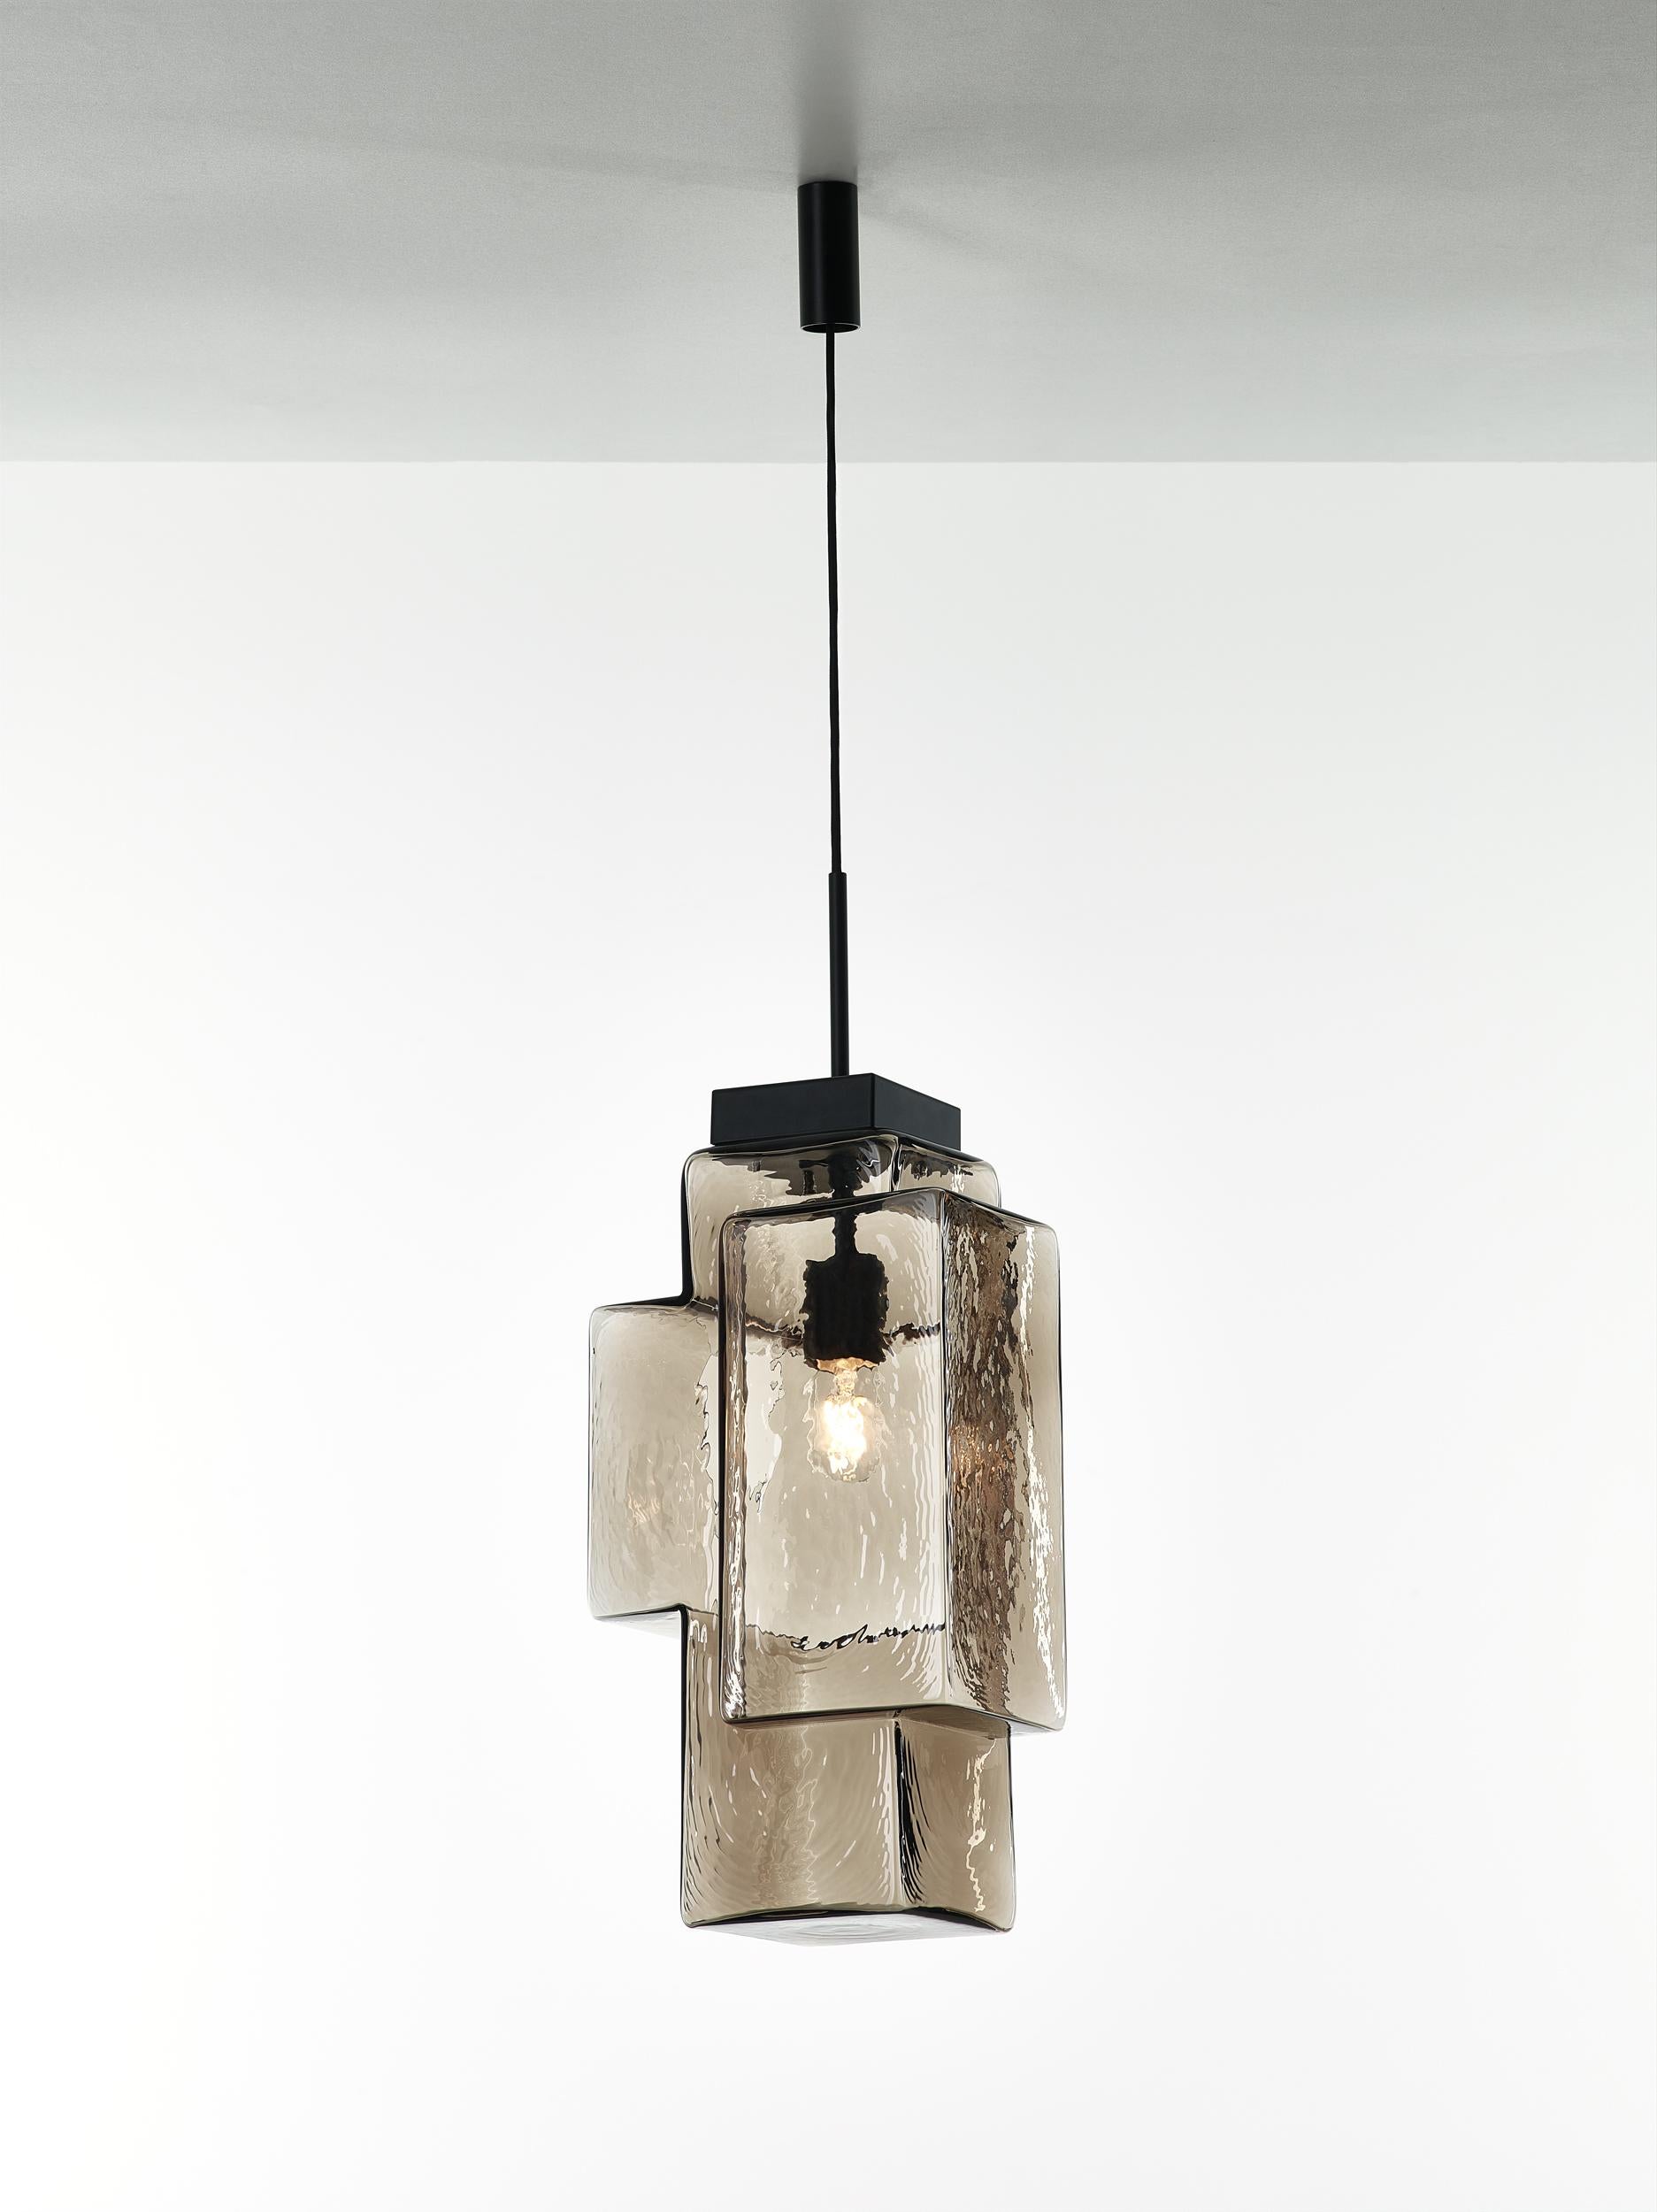 Set of 2 smoke grey Tetris pendant light by Dechem Studio
Dimensions: W 30 x D 23 x H 200 cm
Materials: Metal, glass.
Also available: Different colours available,
In this complex lighting fixture, strict geometric and architectural lines contrast